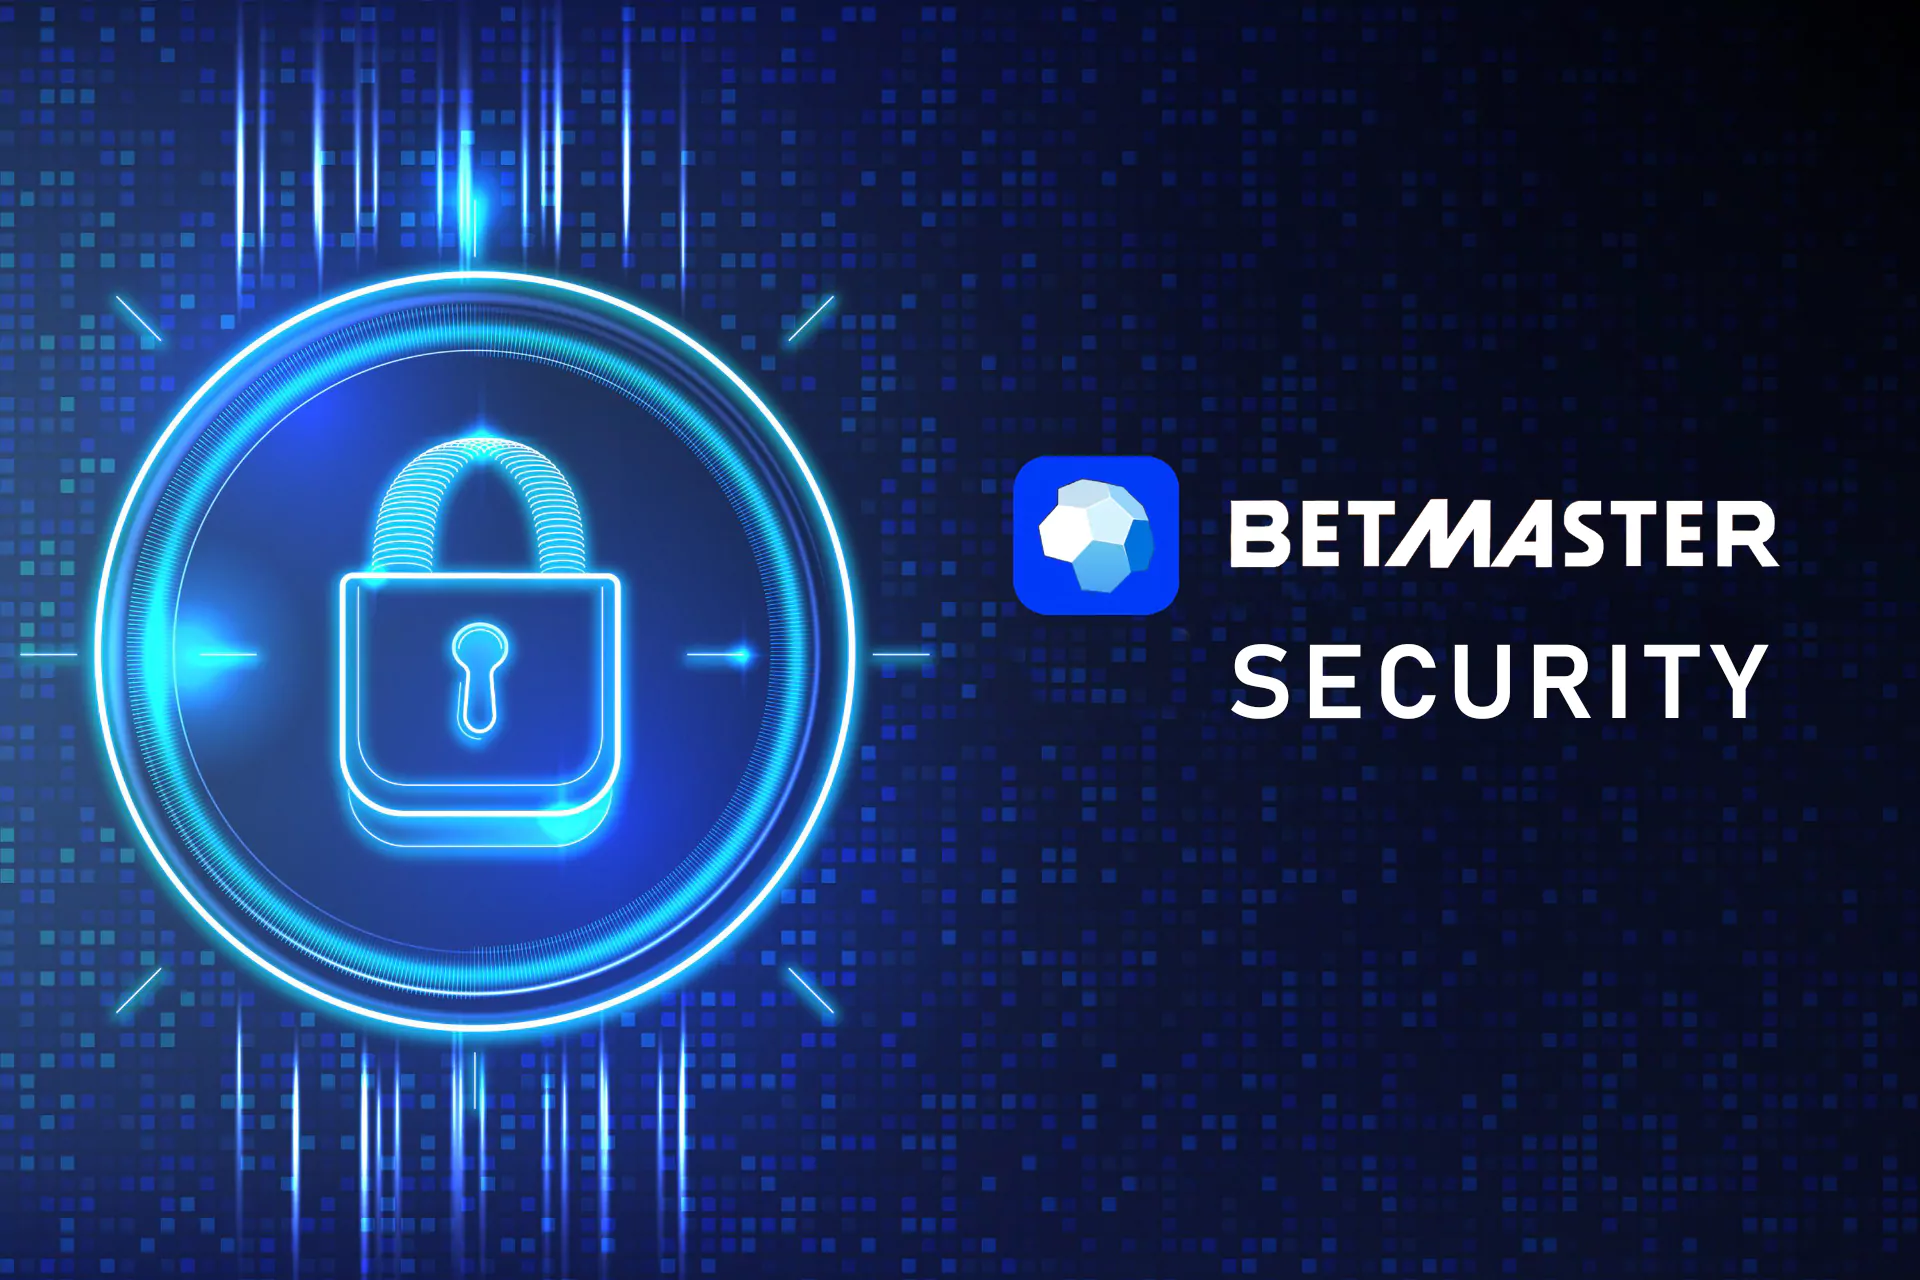 Betmaster is really trustworthy since it works under the Curacao license.